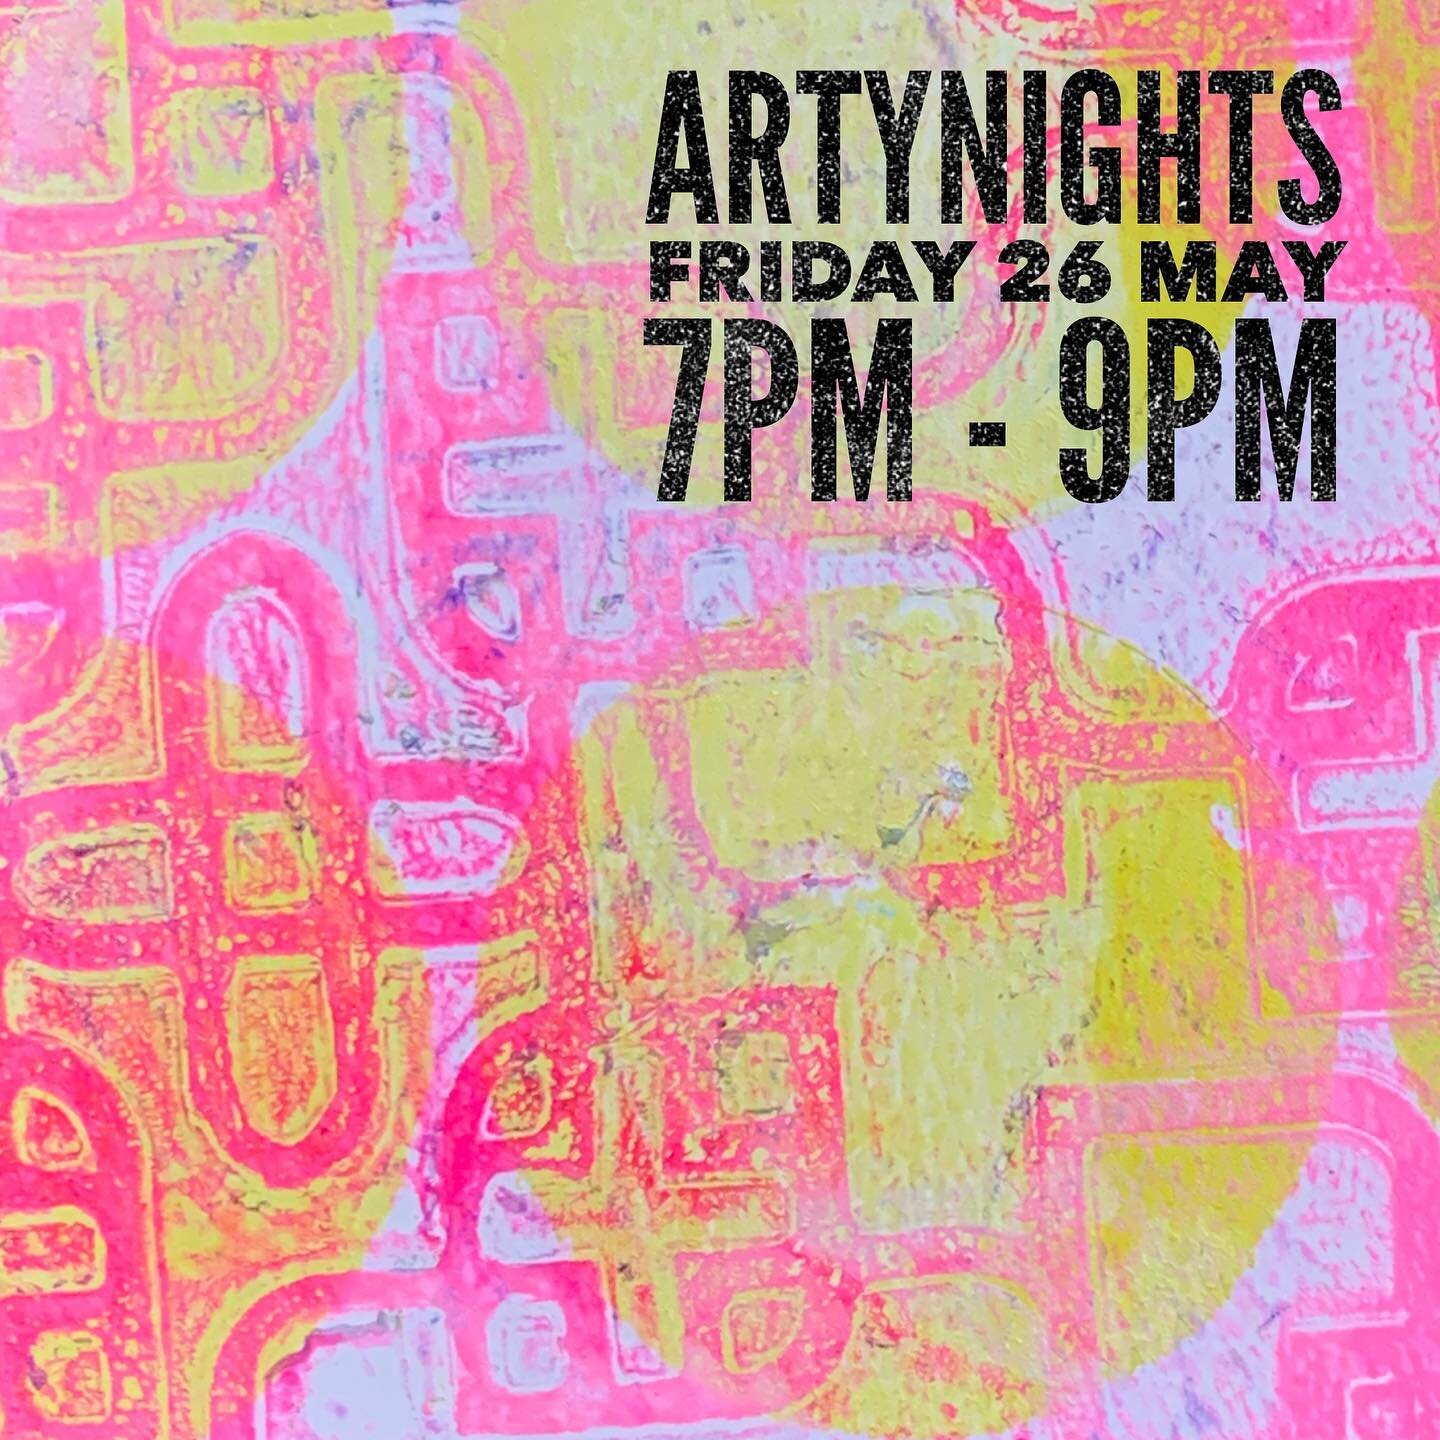 Have you booked your spot for Friday&rsquo;s Artynights?
Love to see you!

Join us for some collage fun - bring your positive mantra and keen eye for colour and shape!

Friday 26 May 7pm to 9pm. 💚

#artynights #perthisok #perthmums #collageart #pert